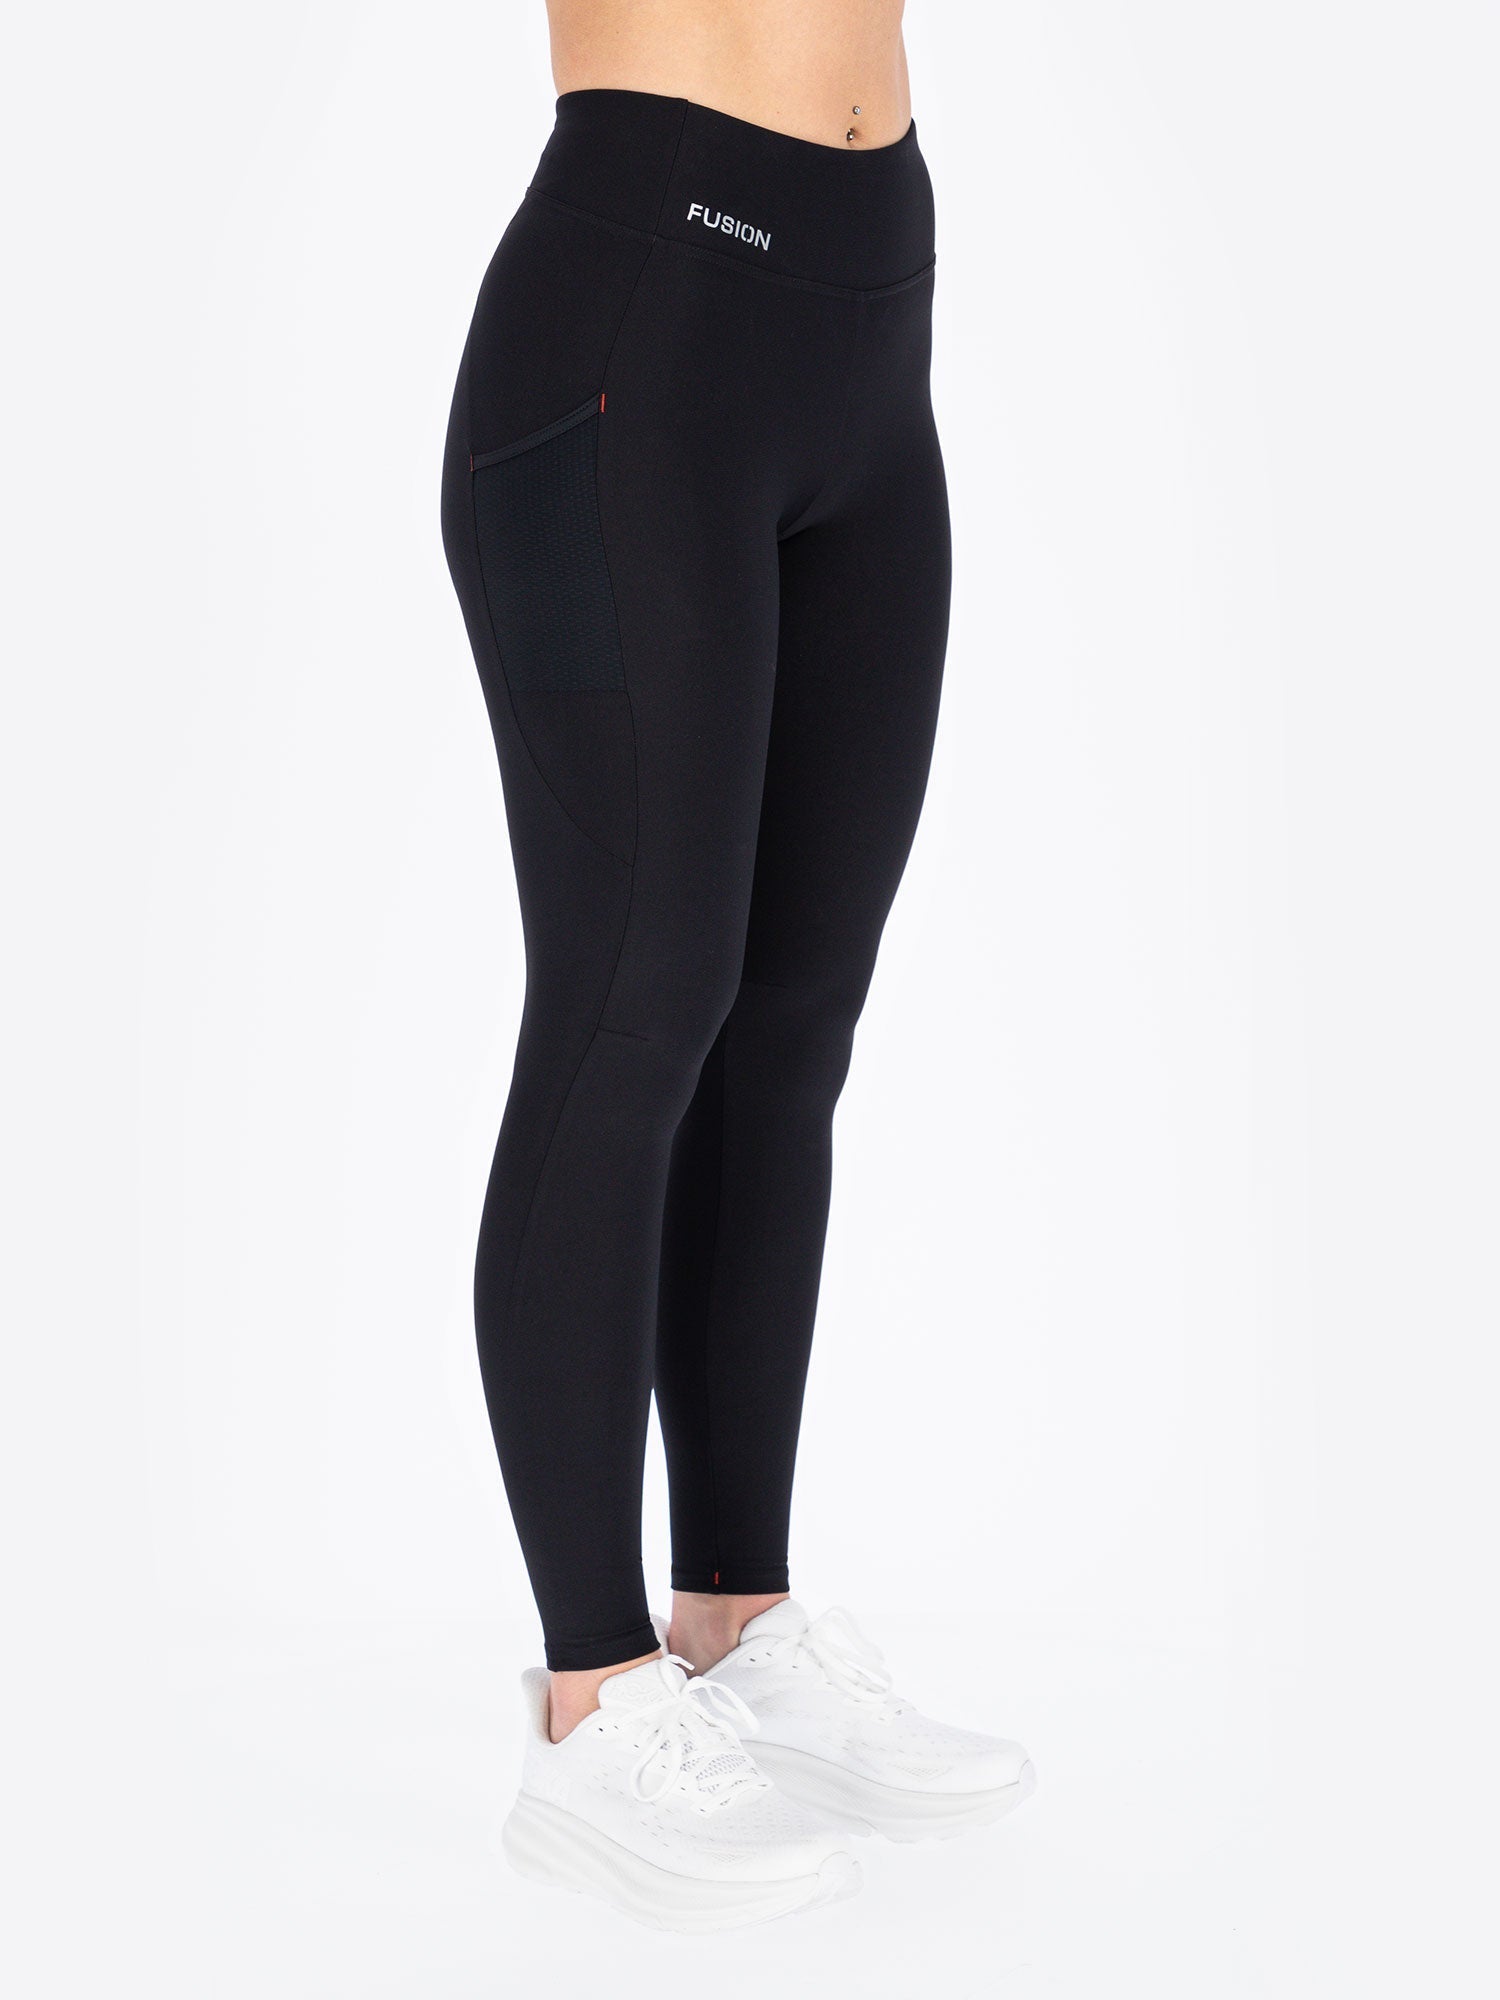 COWI Women's Gym Tights